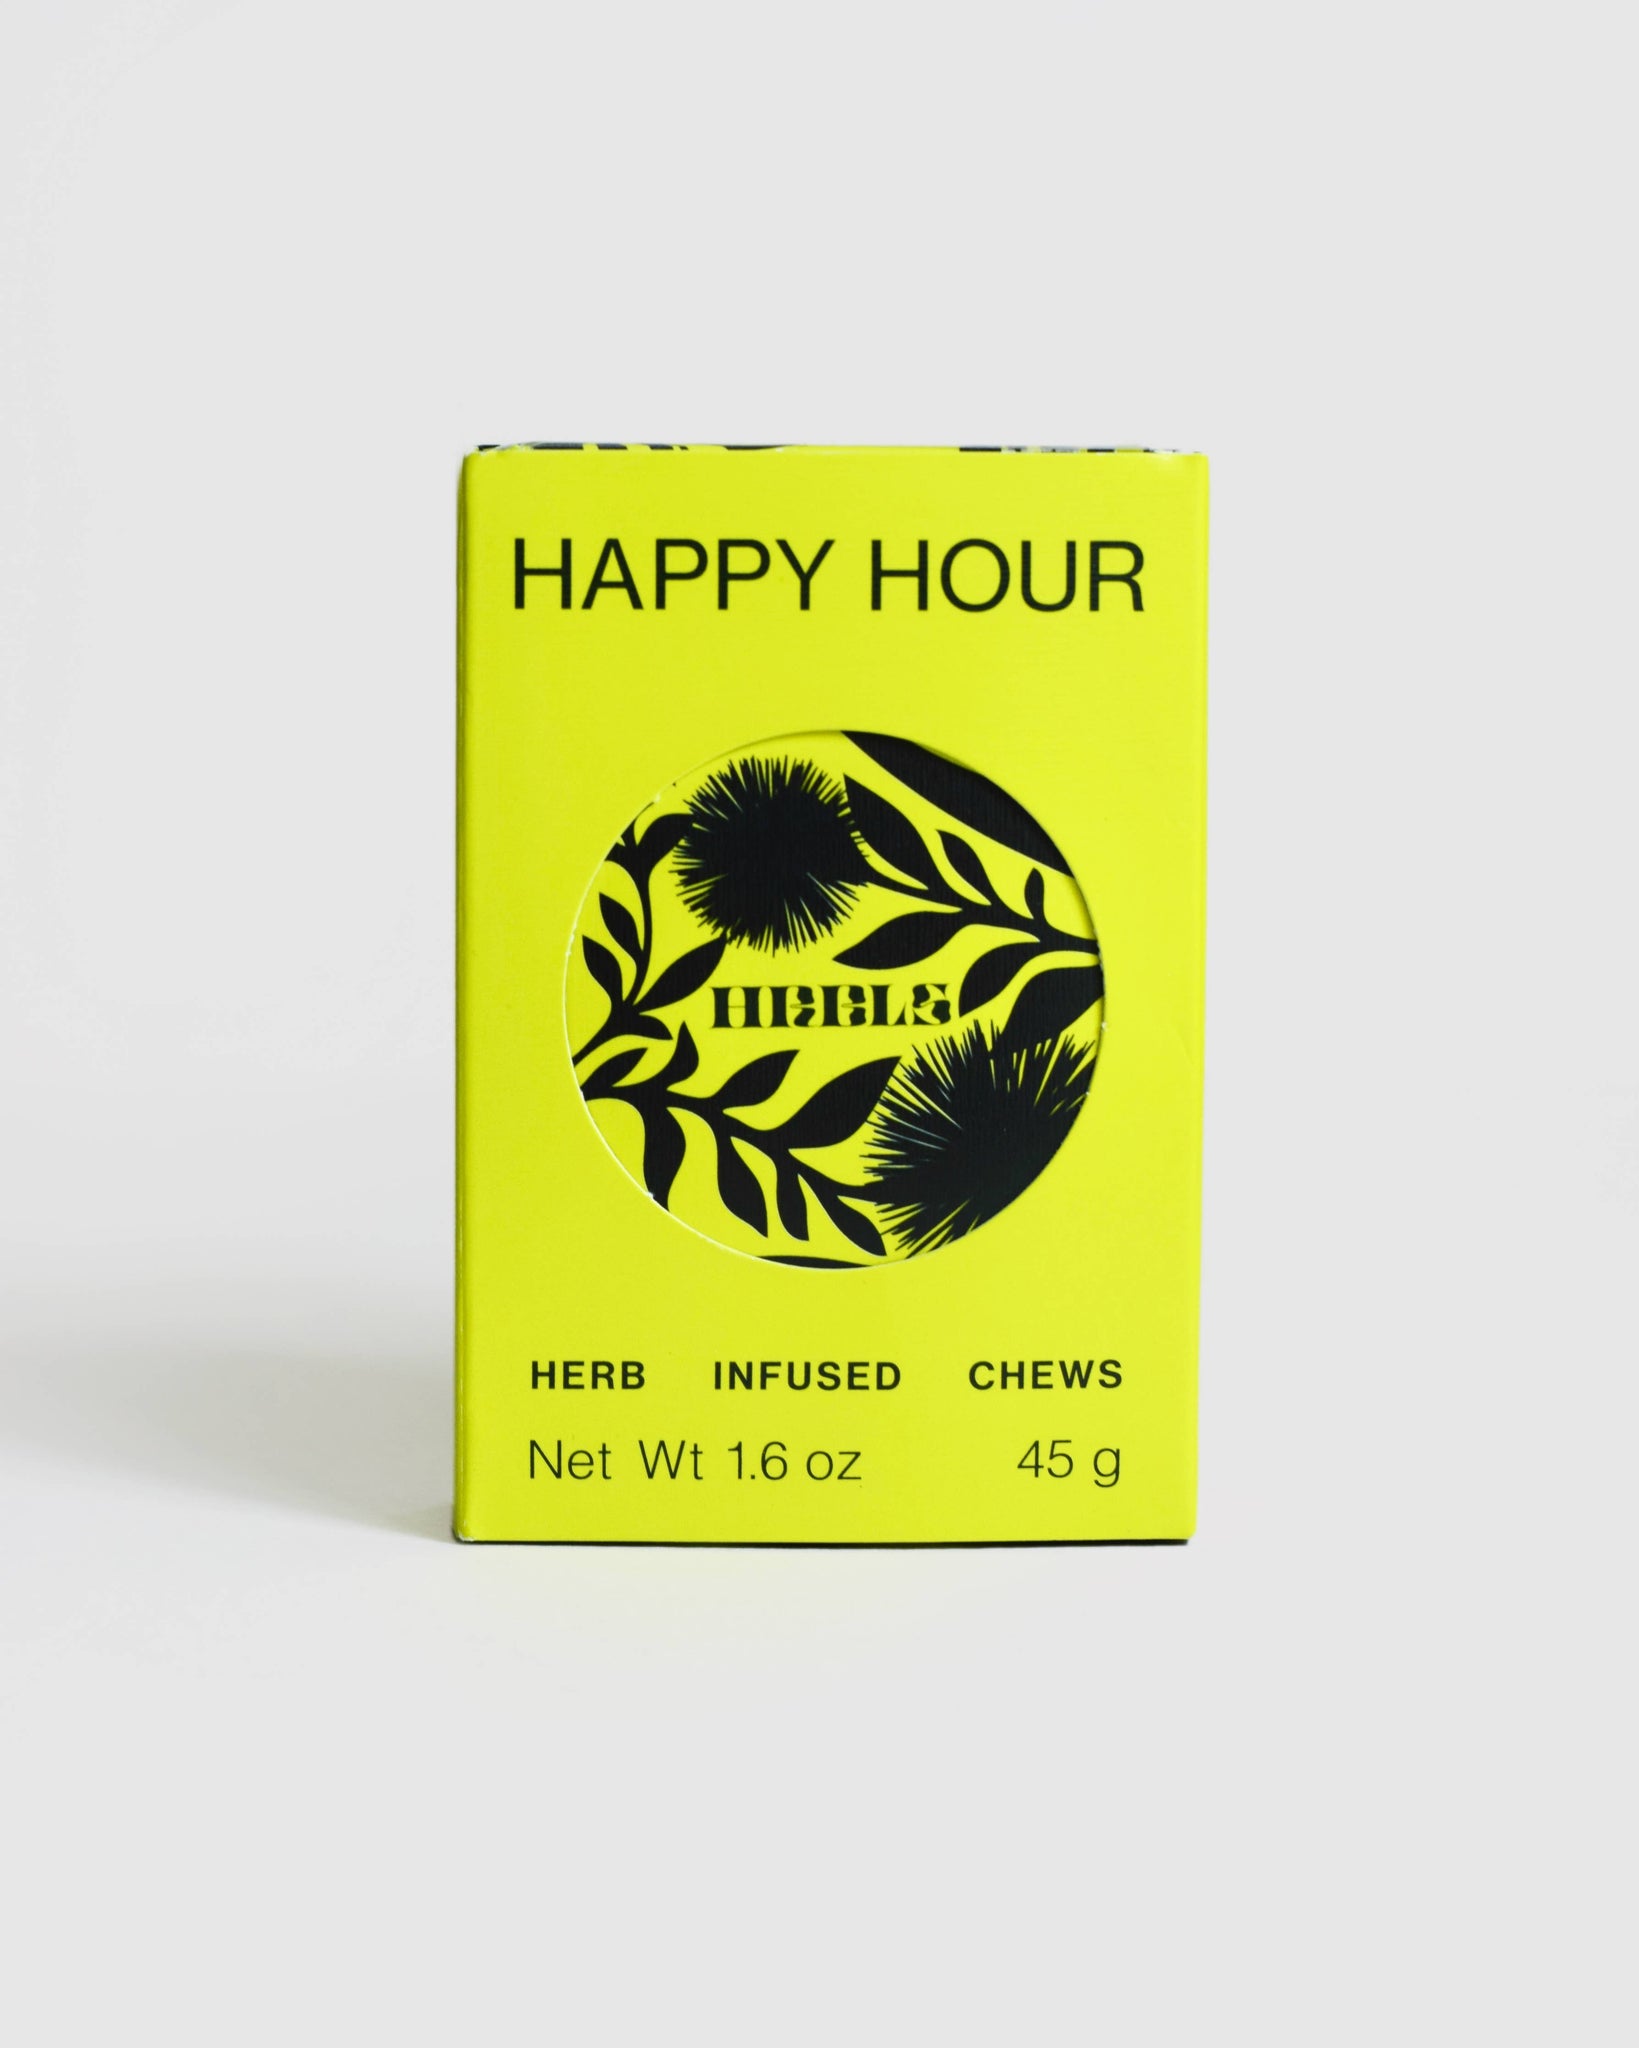 HRBLS | Happy Hour